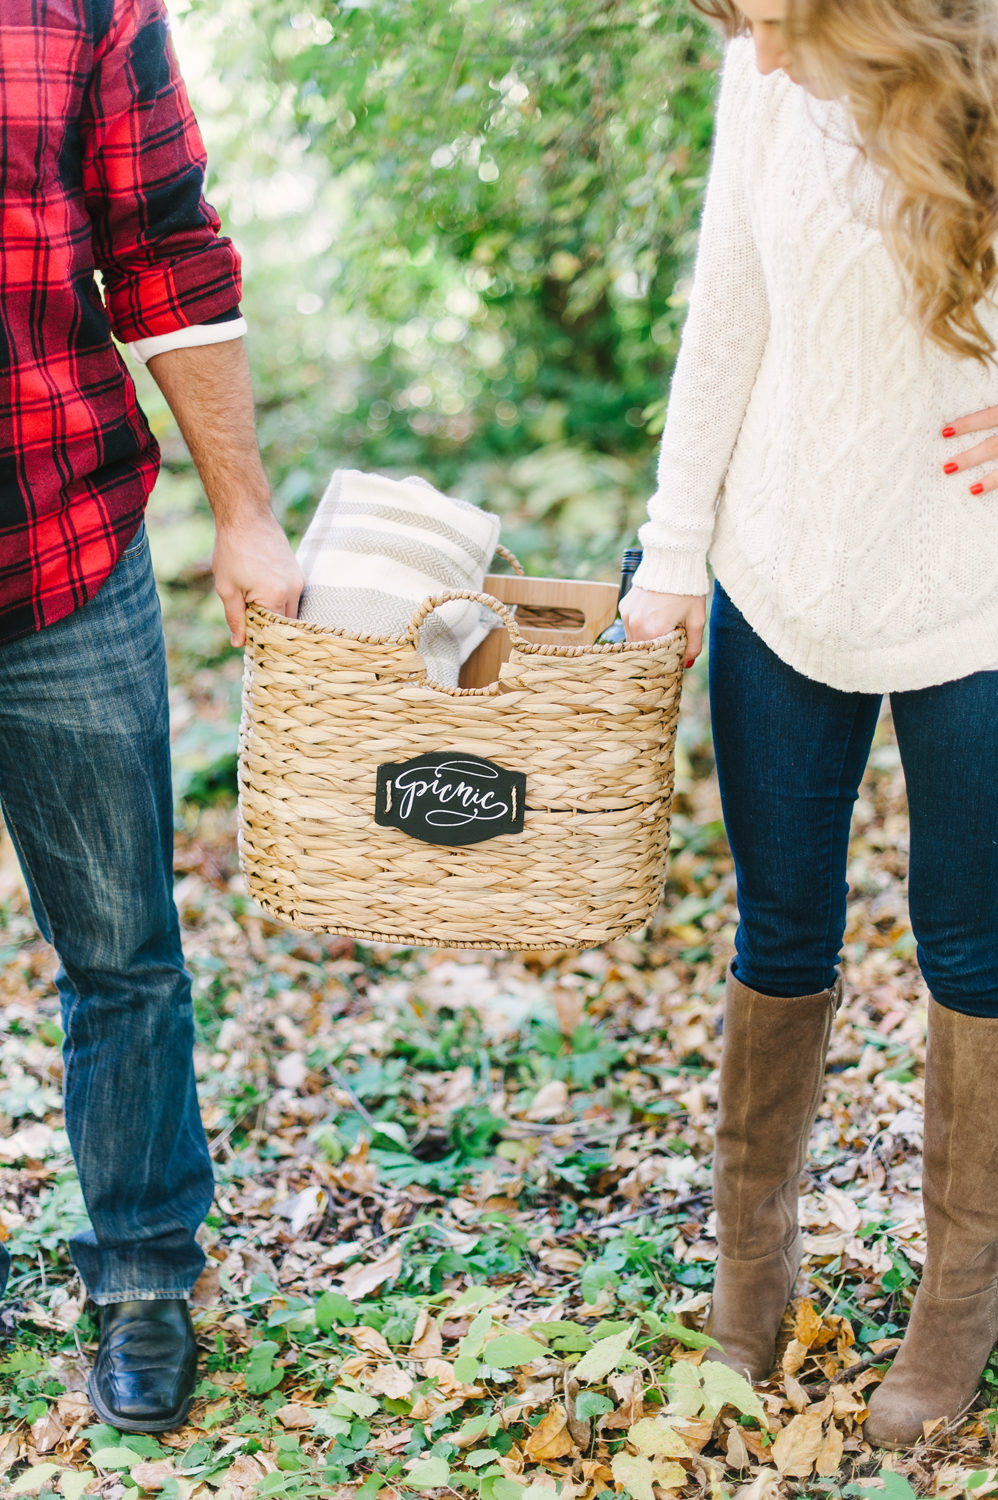 Isn't fall a great time for a picnic? // 10 Stunning Fall Engagement Photo Inspirations. // mysweetengagement.com